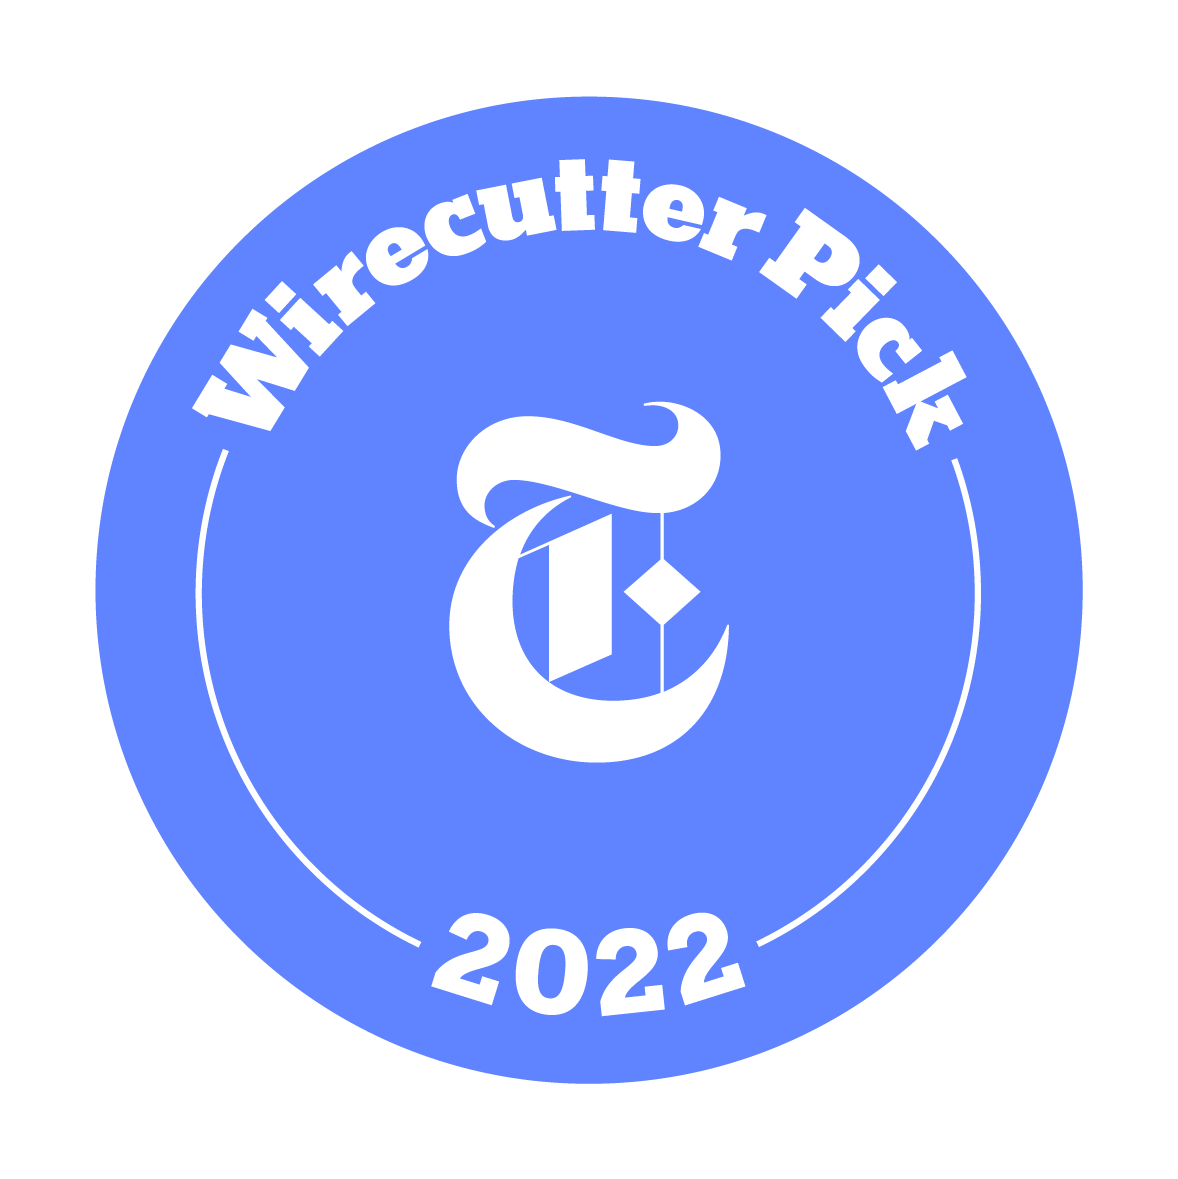 ny times wirecutter